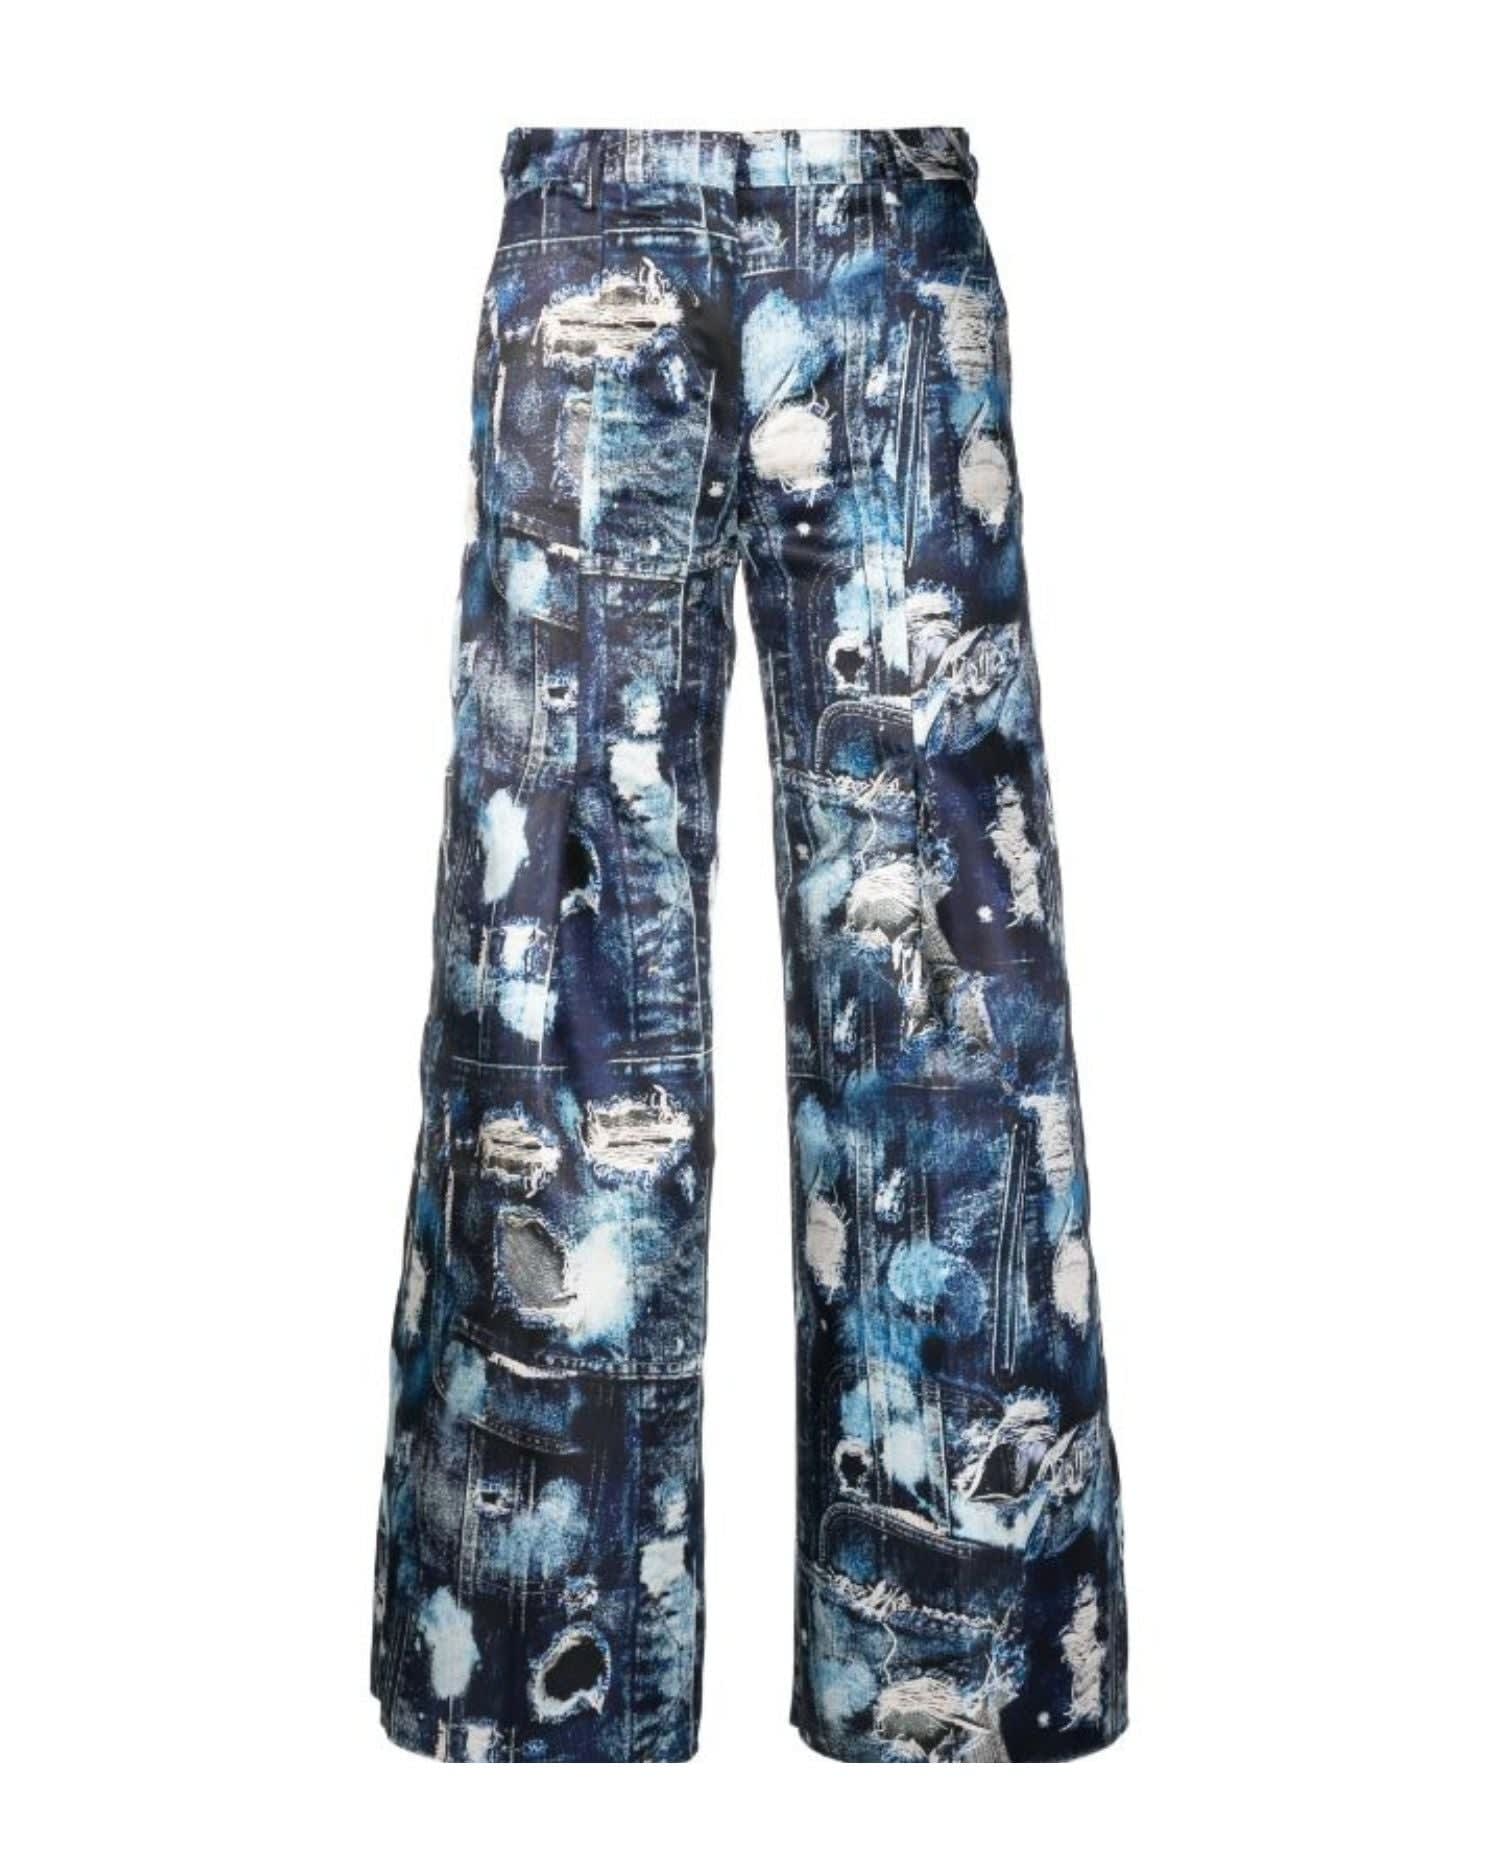 John Richmond Cropped Trousers With Wide Leg And Iconic Runway Denim-effect Pattern. In Fantasia